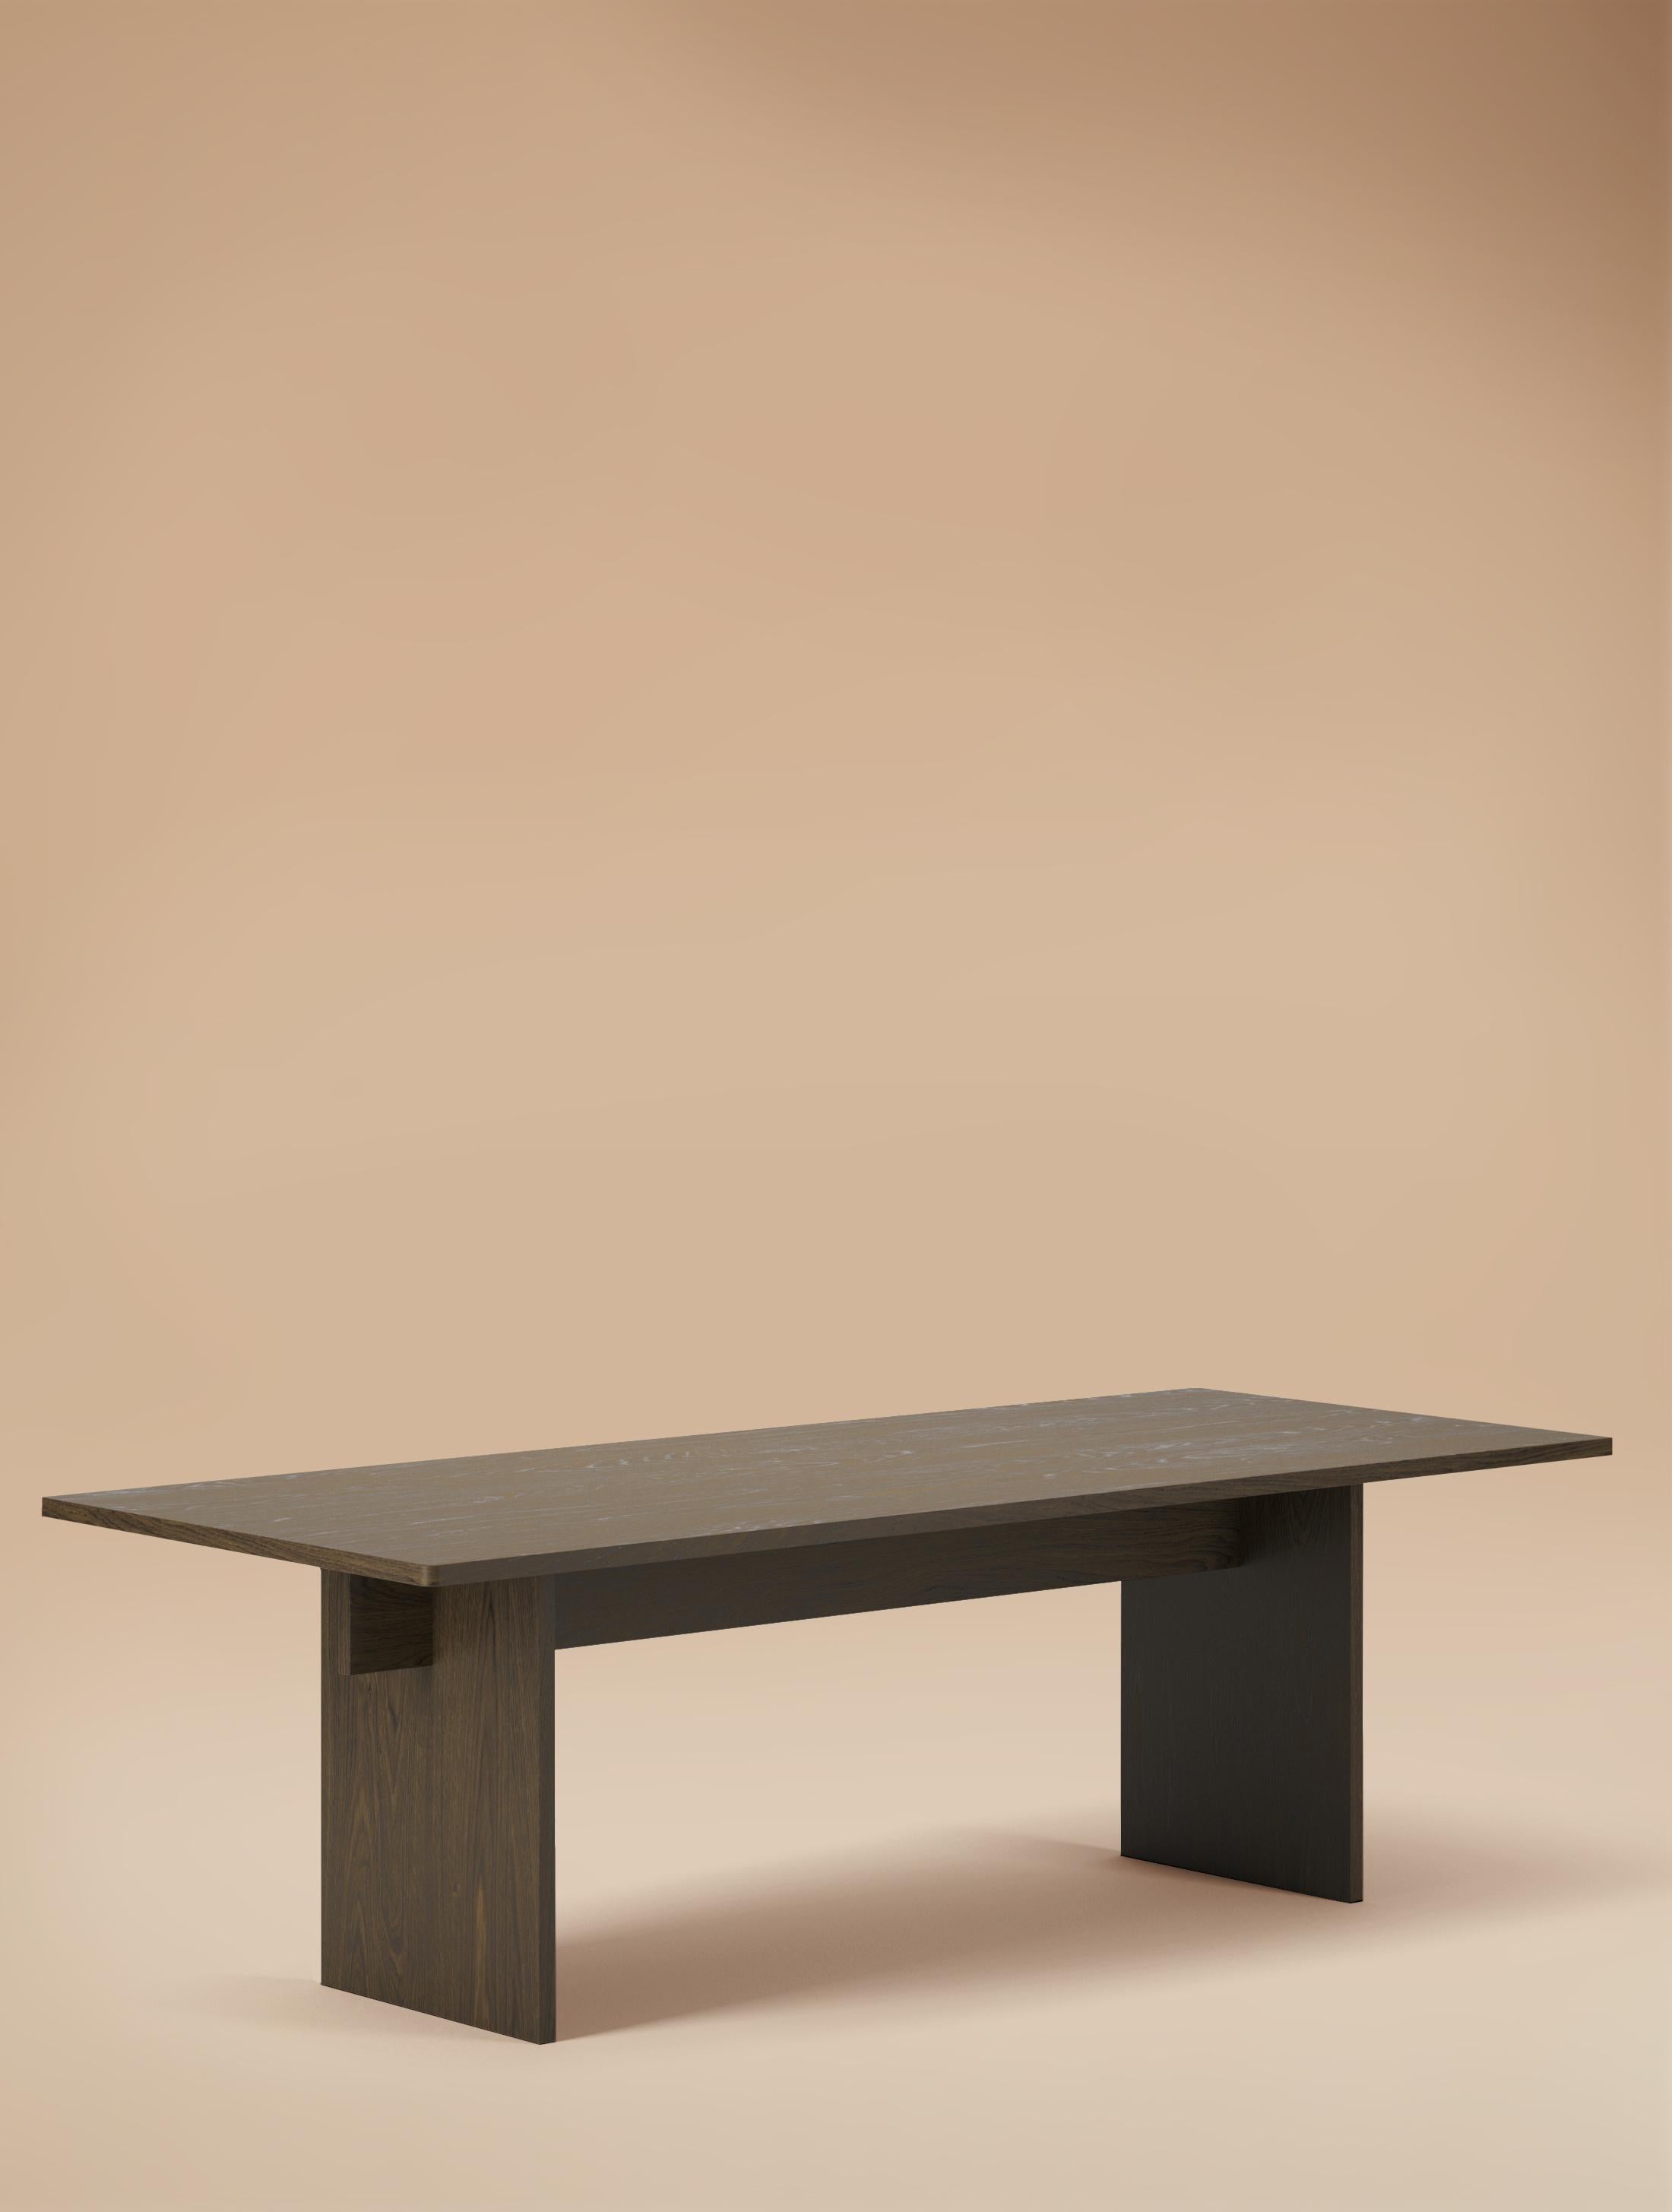 6 Seater Faure Table Handcrafted in Oak by Kevin Frankental 11